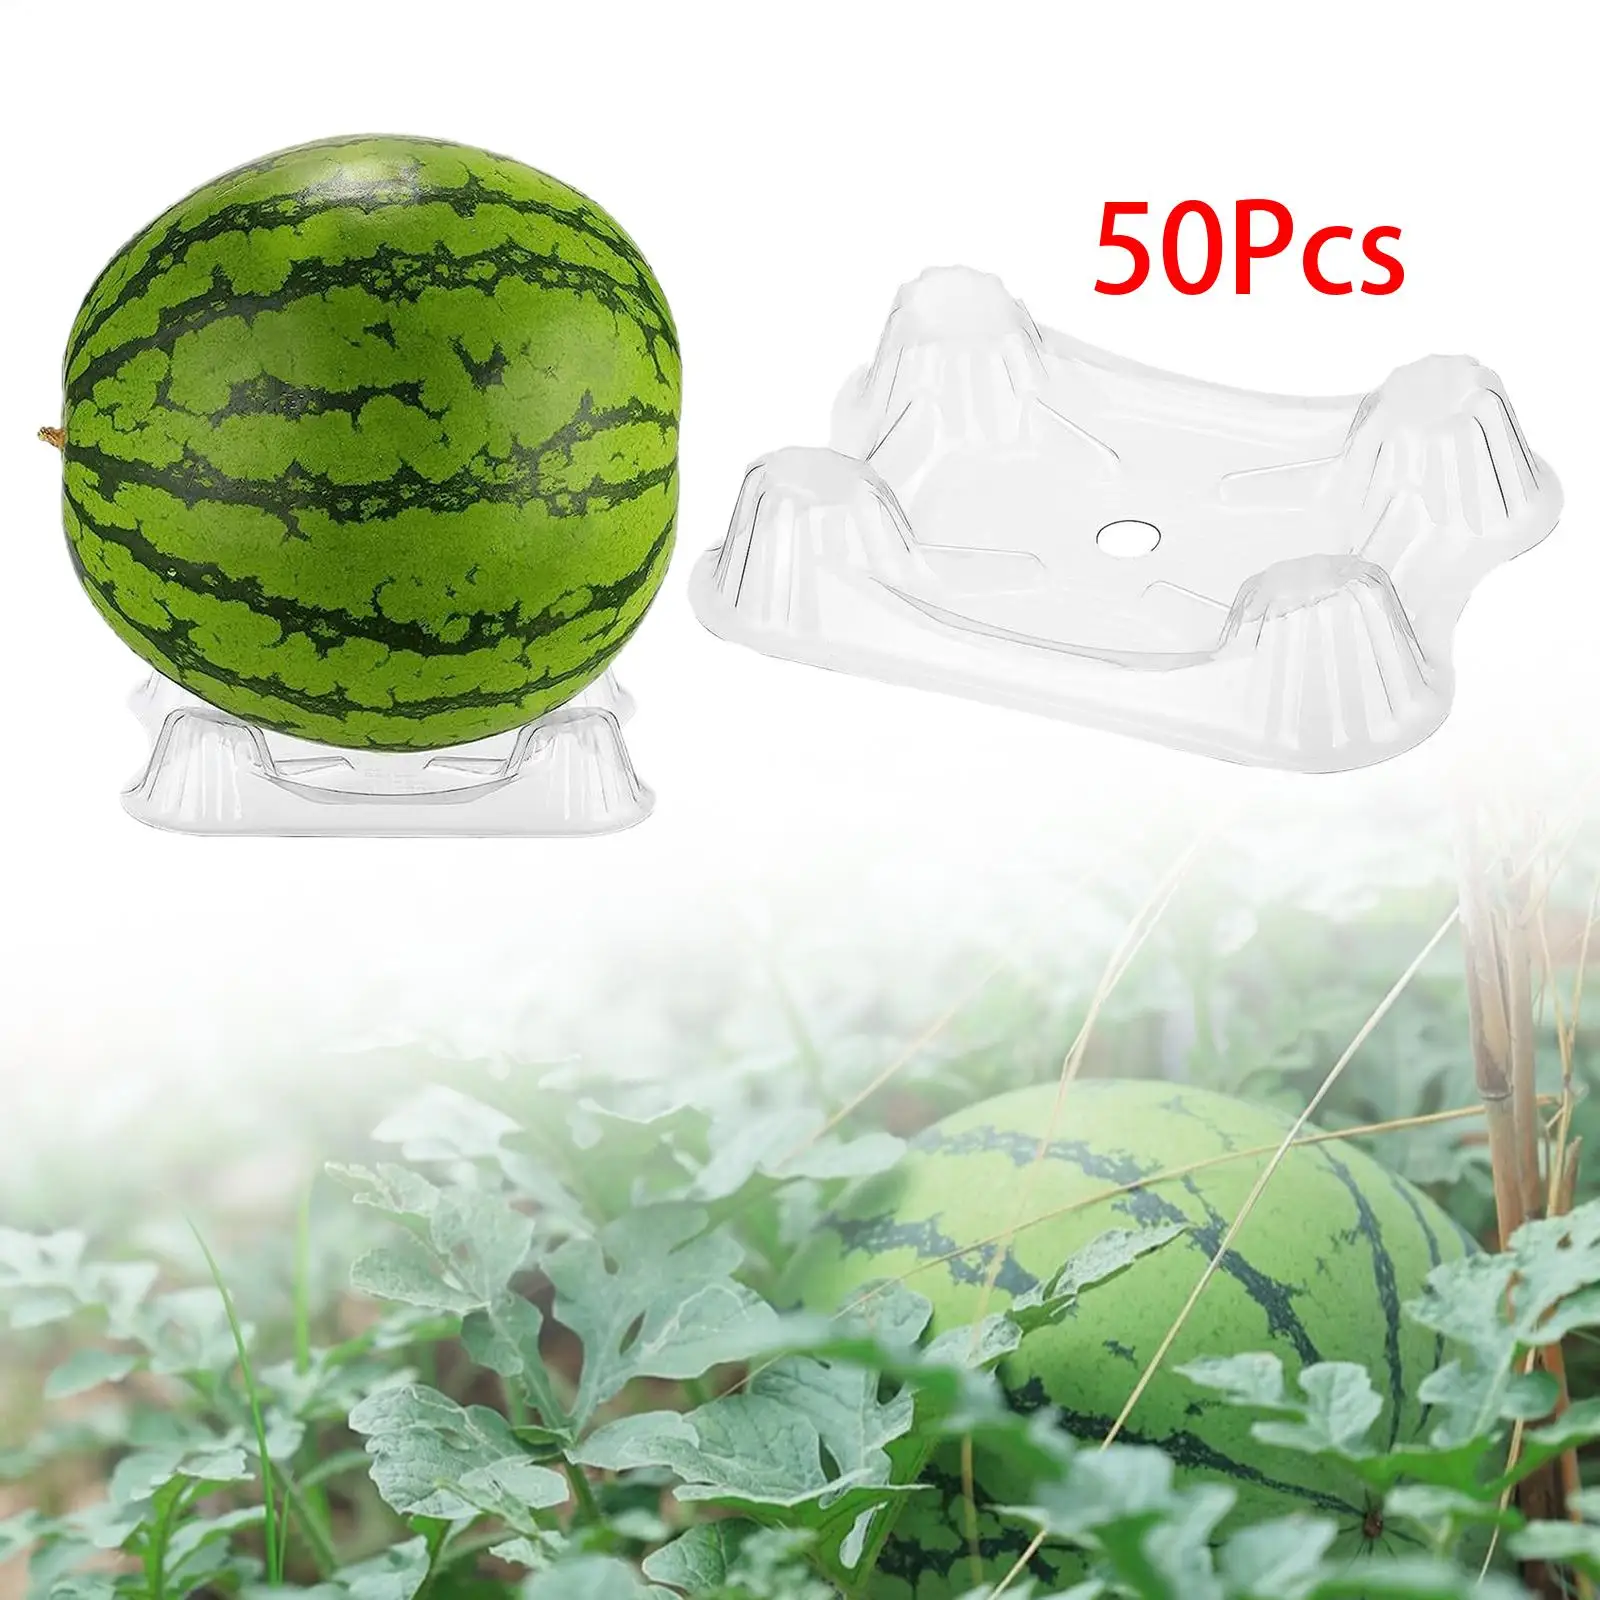 50 Pieces Melon Support Cradle Garden Cages Tray Garden Plant Support for Pumpkin Strawberry Courgette Cantaloupe Watermelon